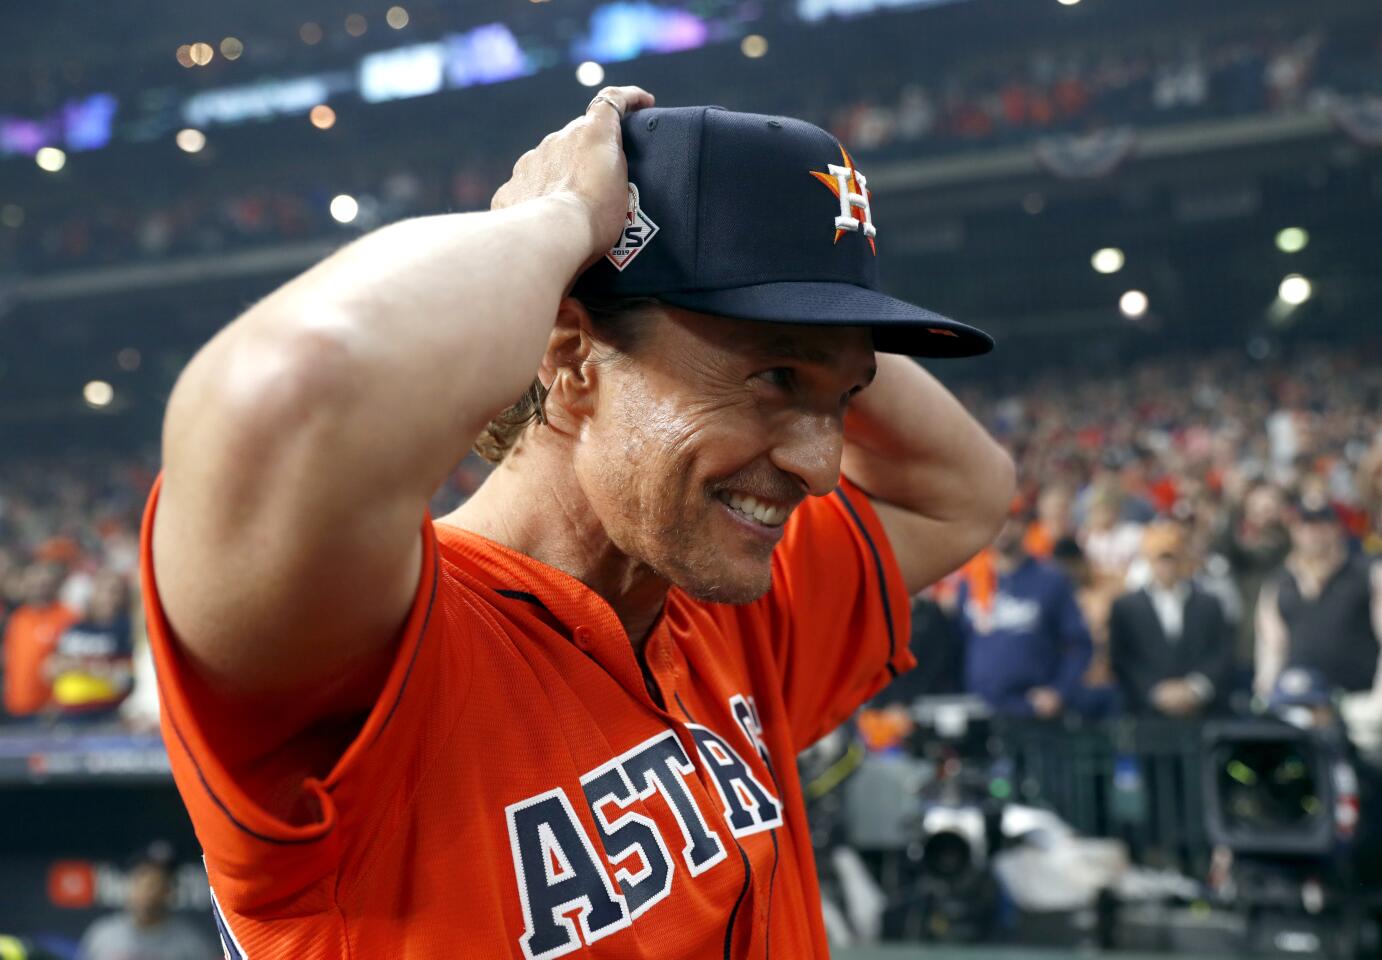 Matthew McConaughey on the field before Game 7, wearing an Astros cap and jersey.